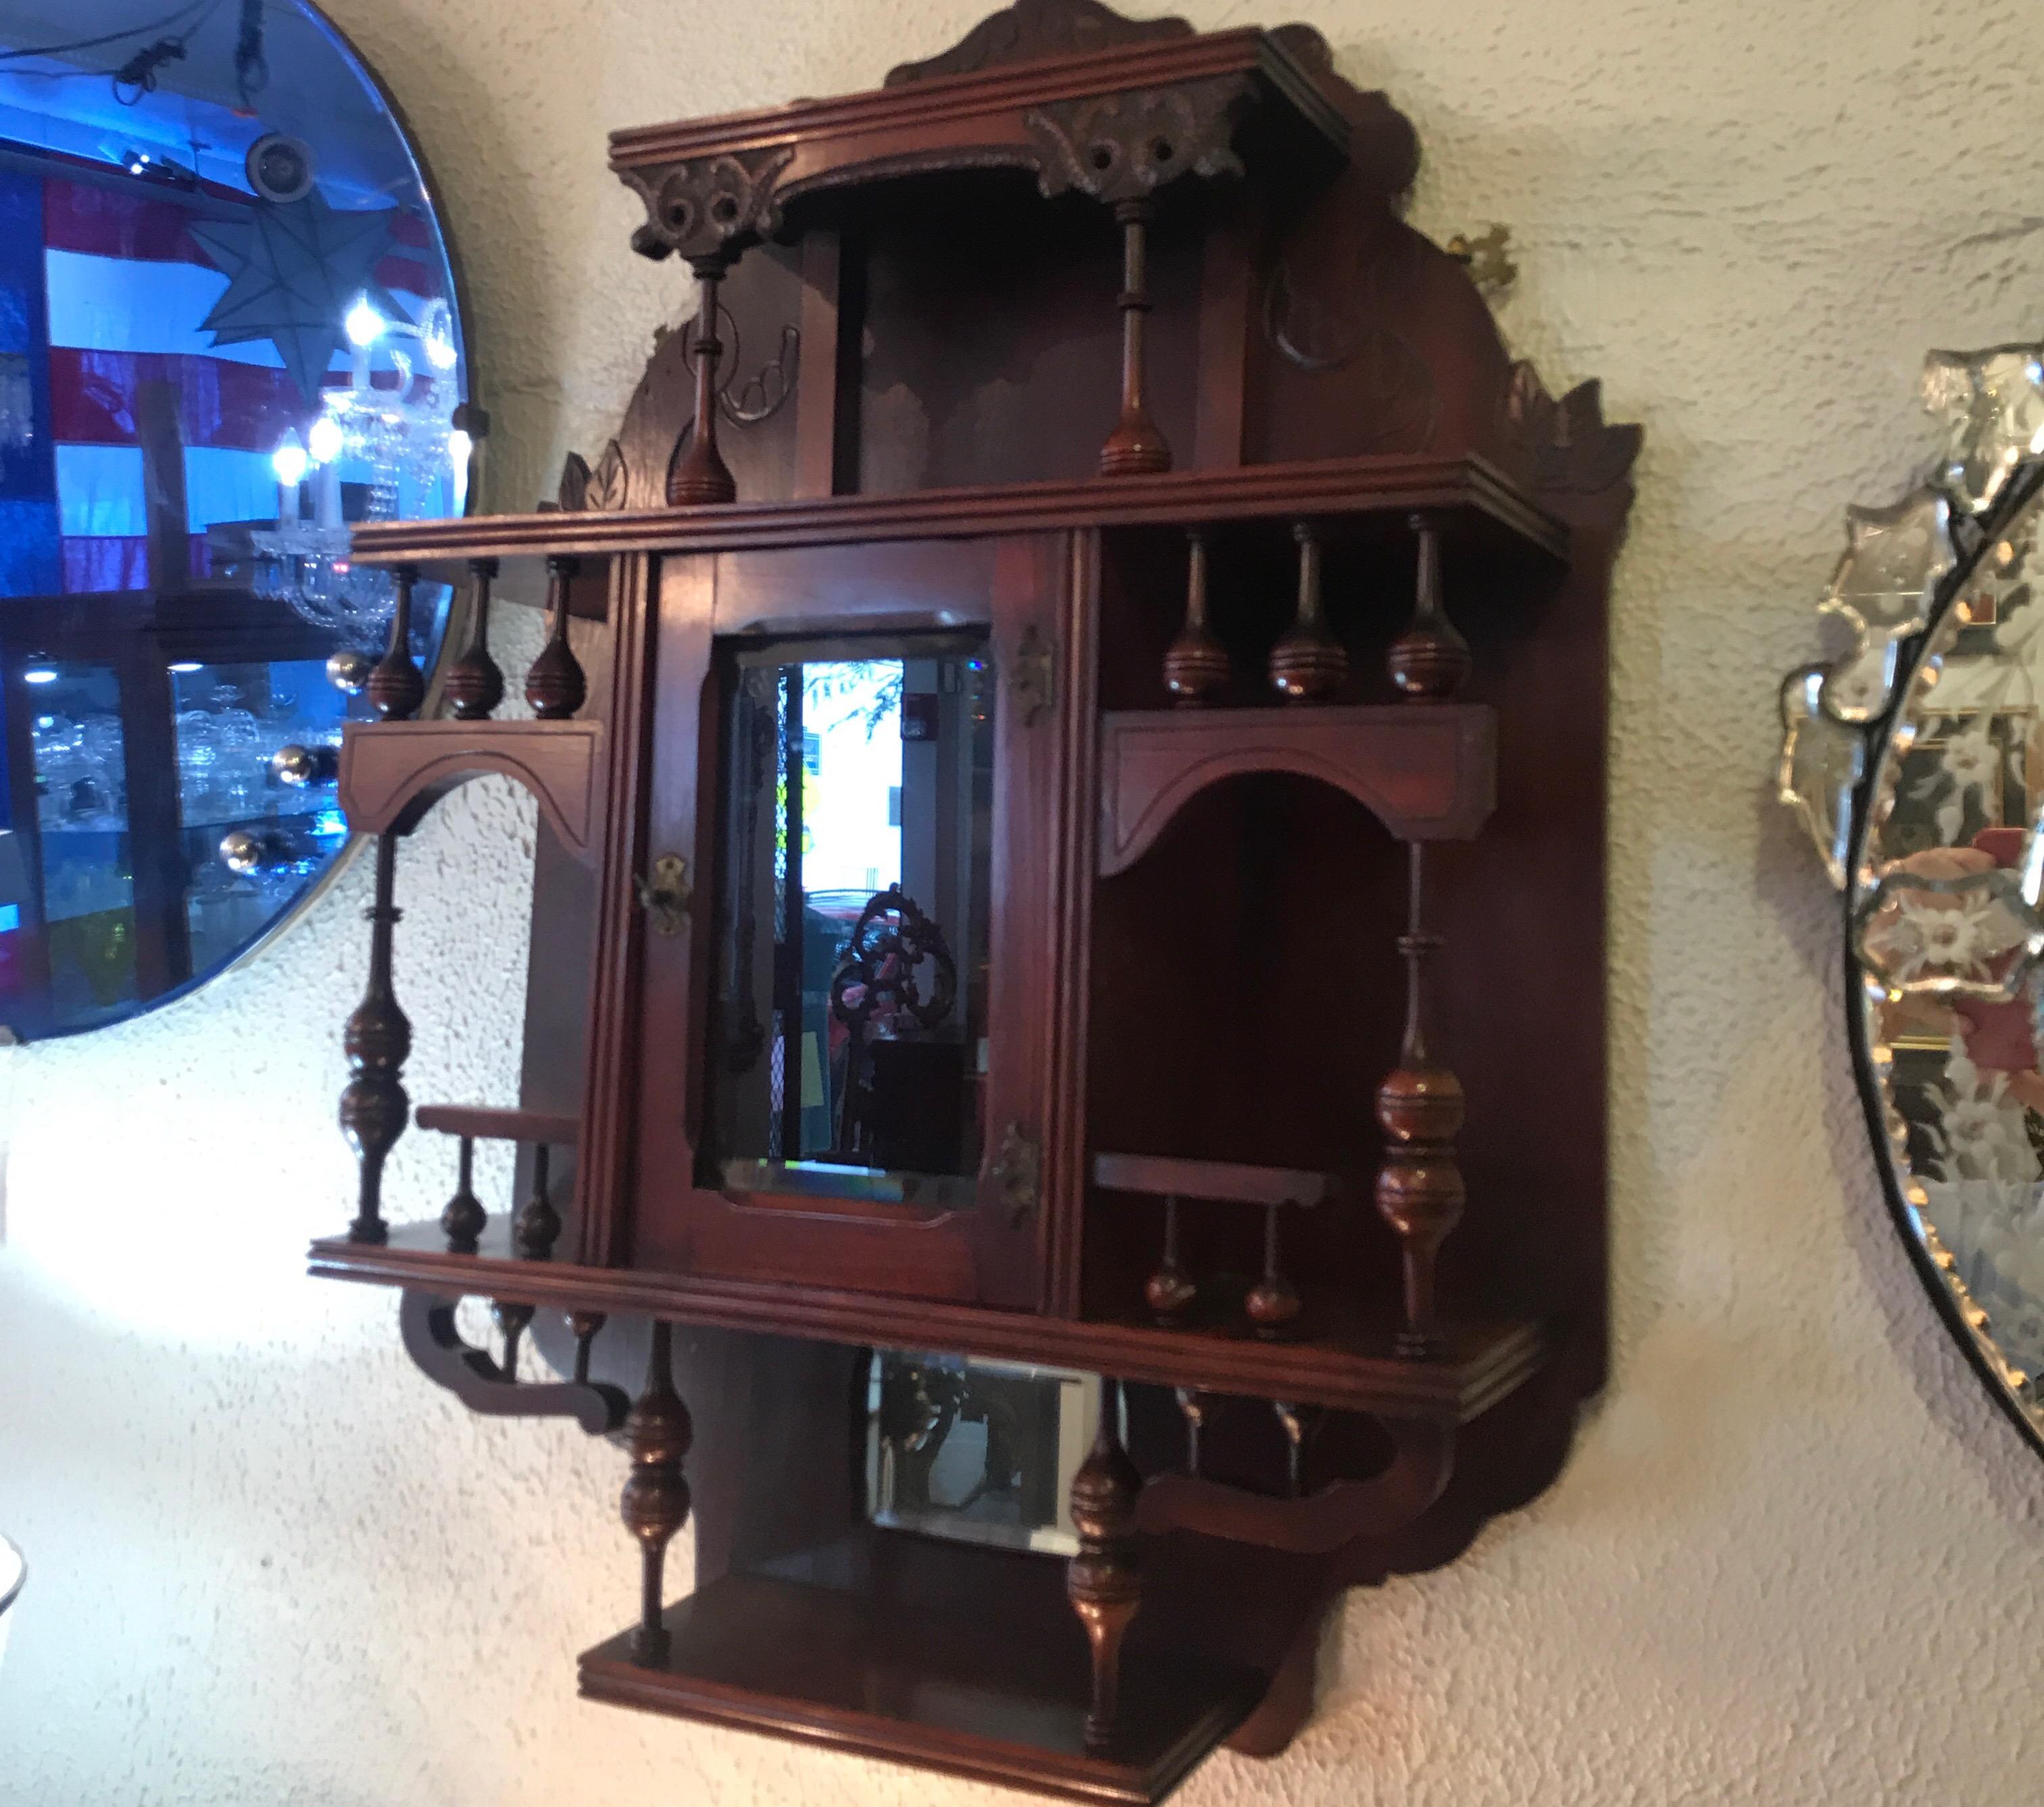 Charming mahogany hanging curio what not shelf with beveled glass and mirror. The center glass door flanked by two open shelves with display area at the top and bottom.